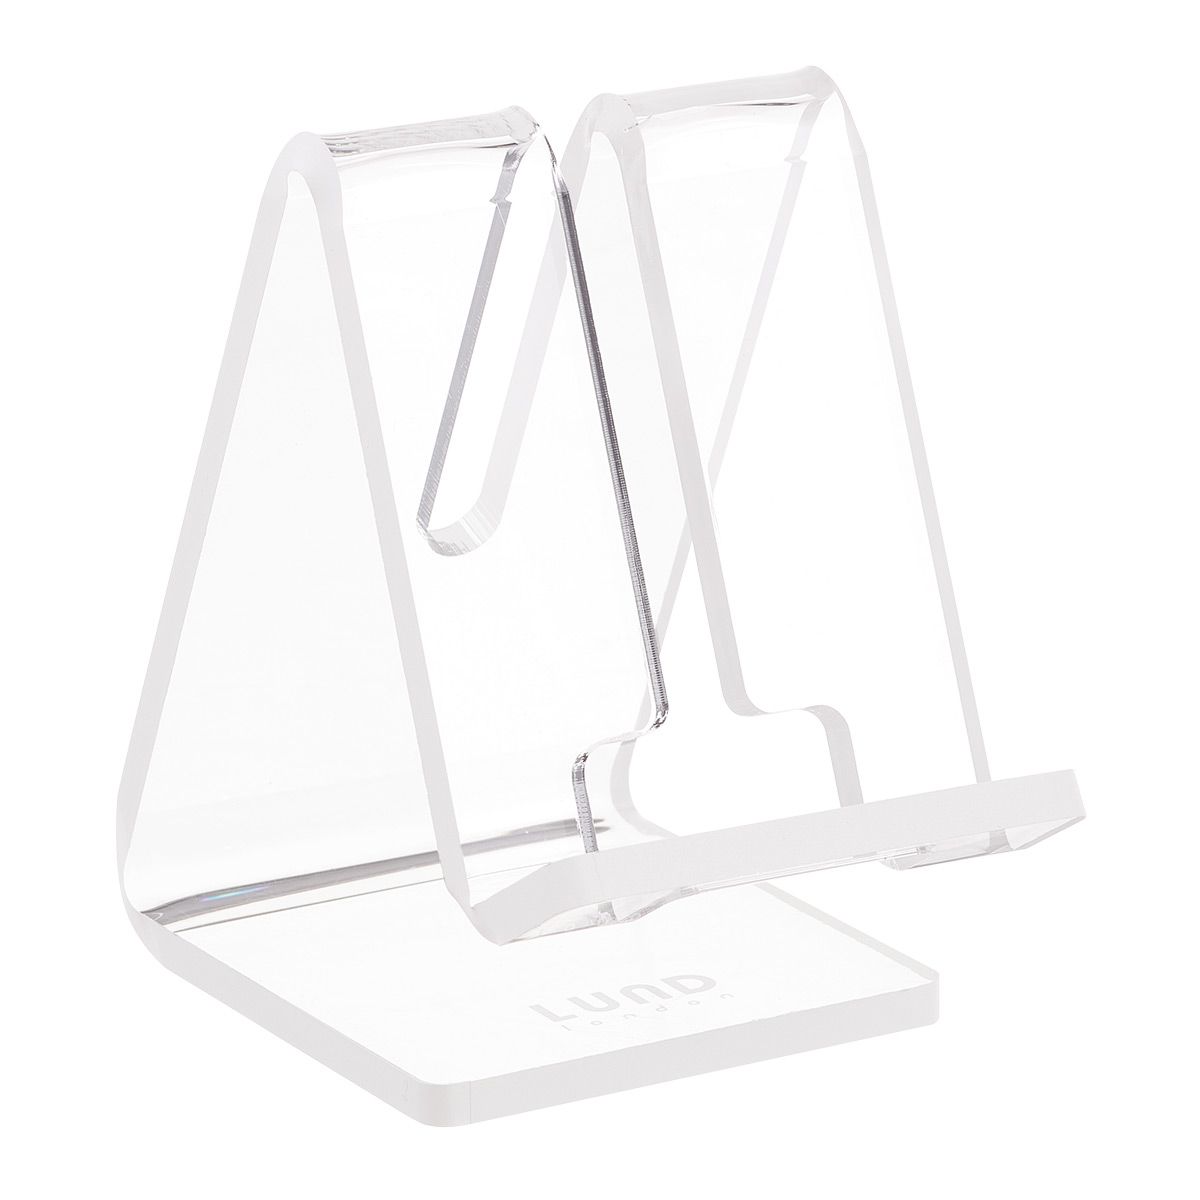 Acrylic Phone Holder | The Container Store